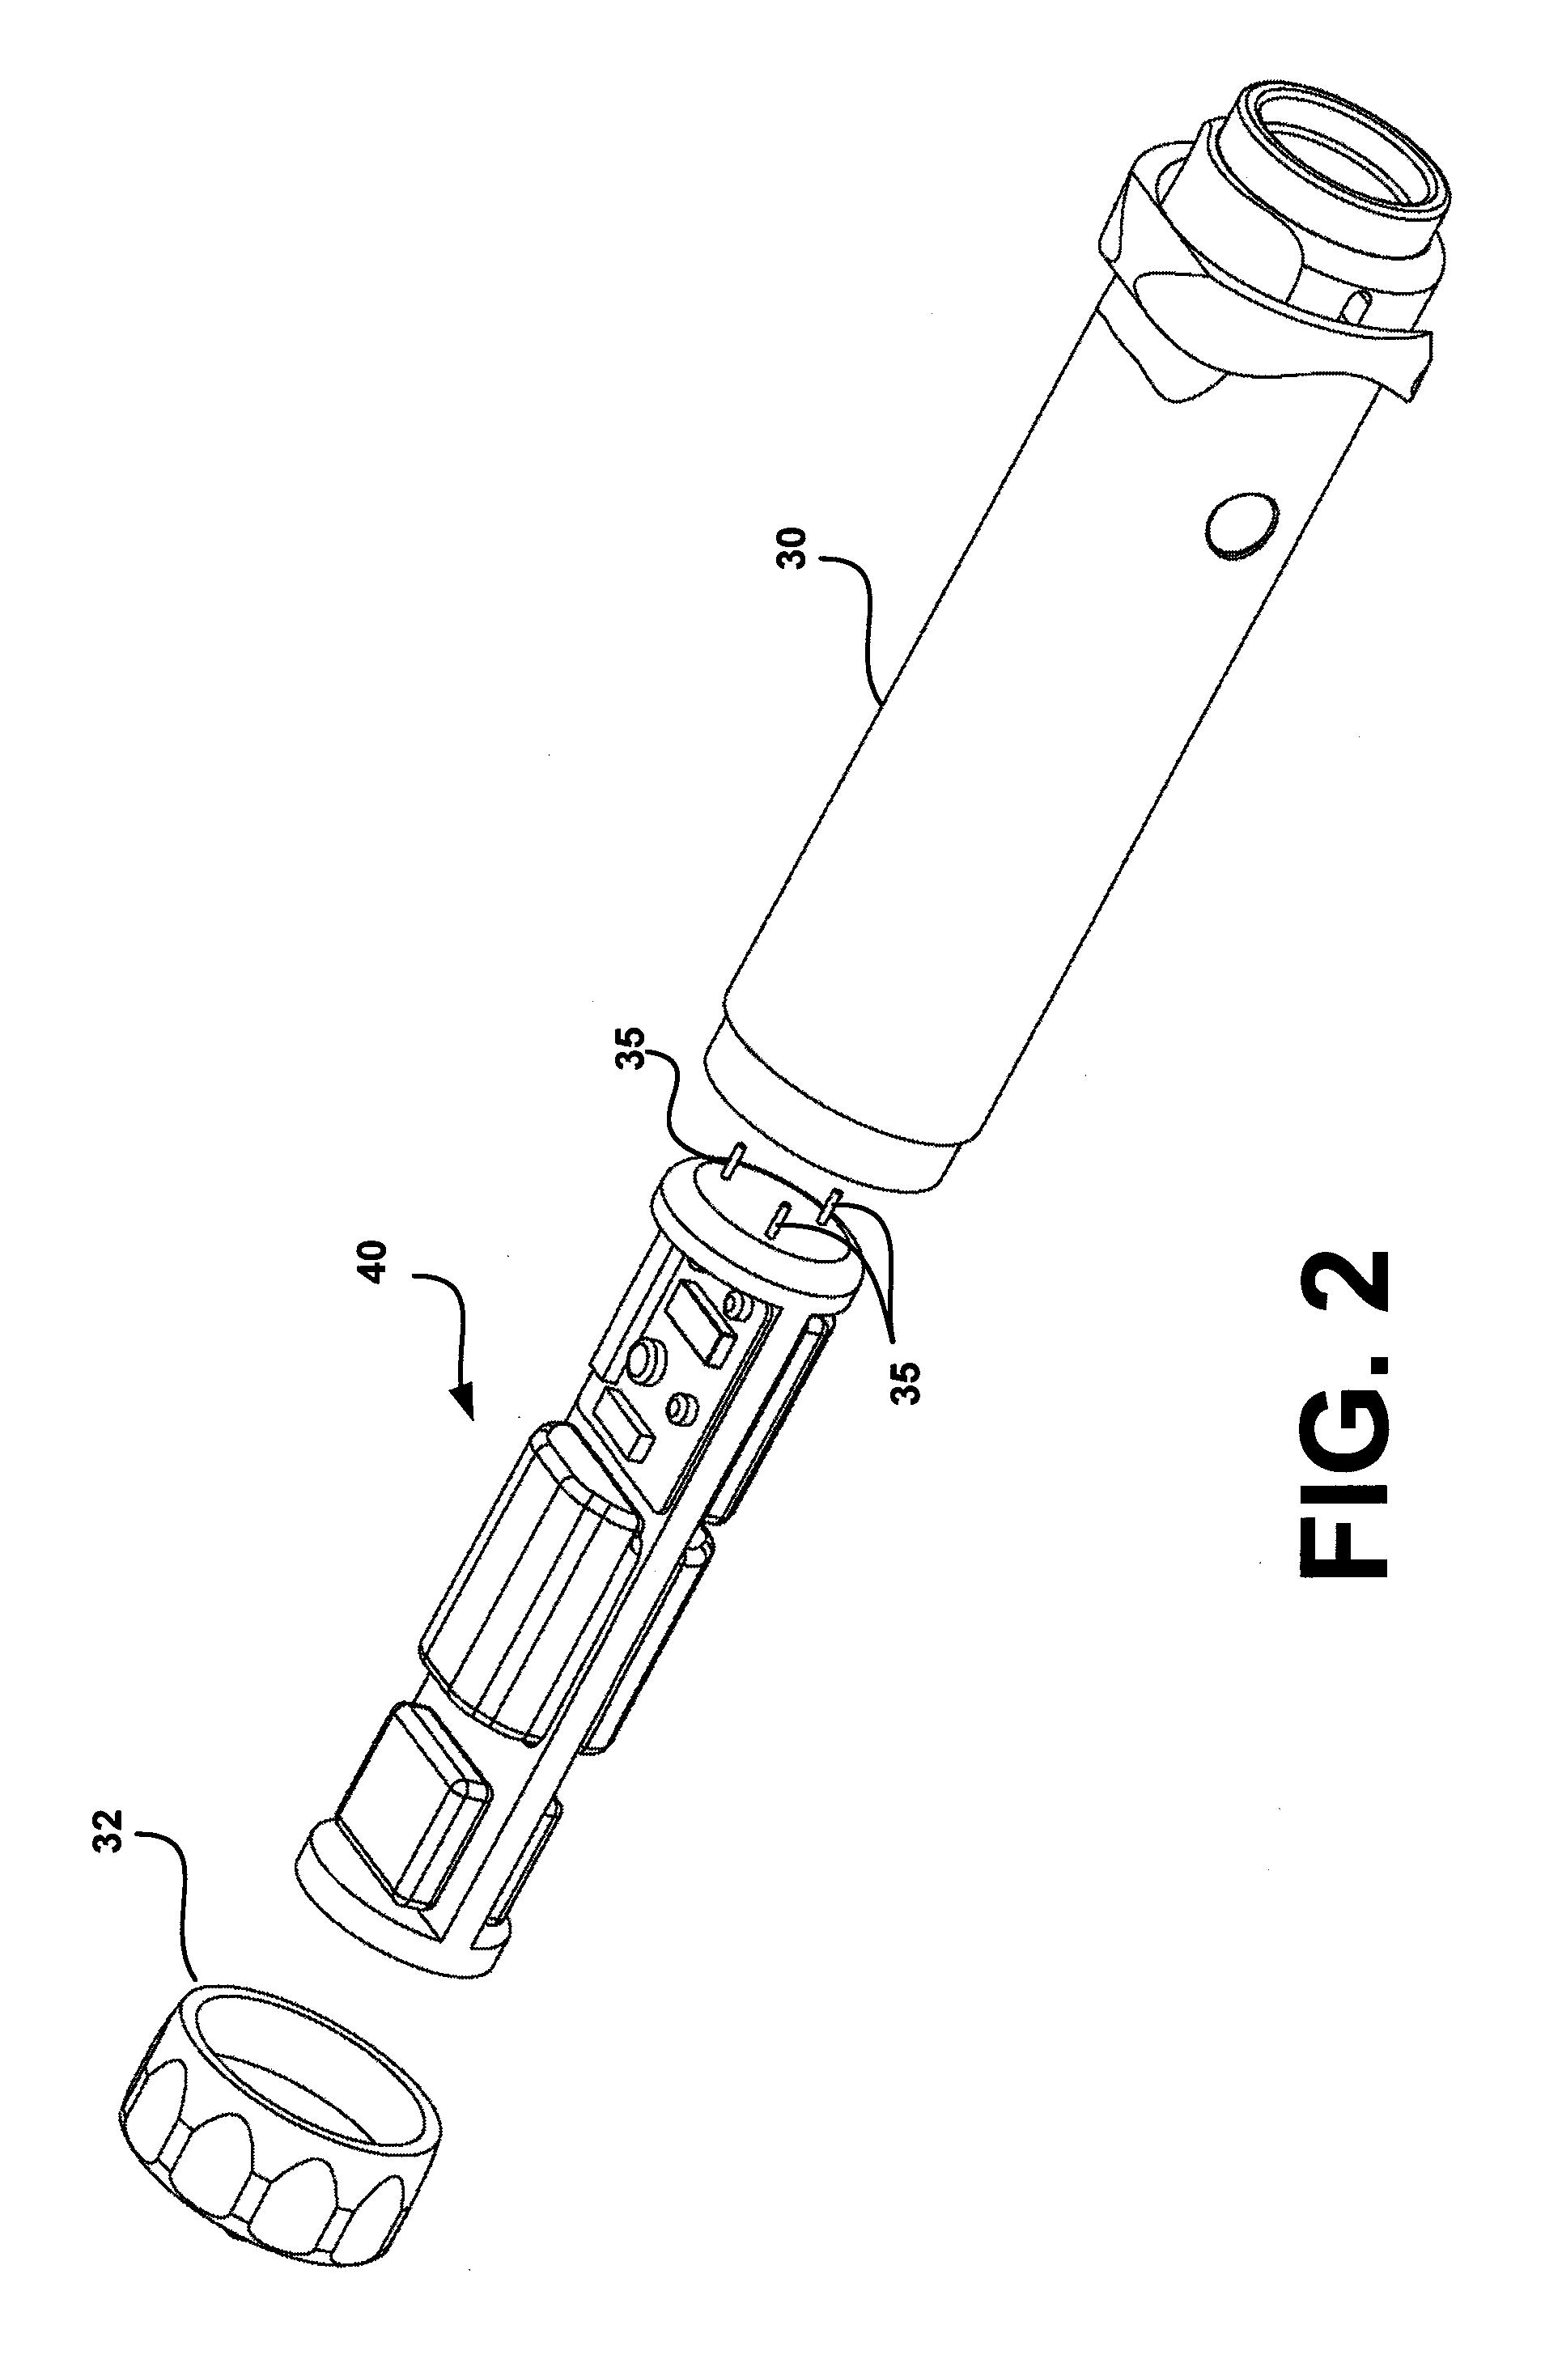 Endo-surgical device and method